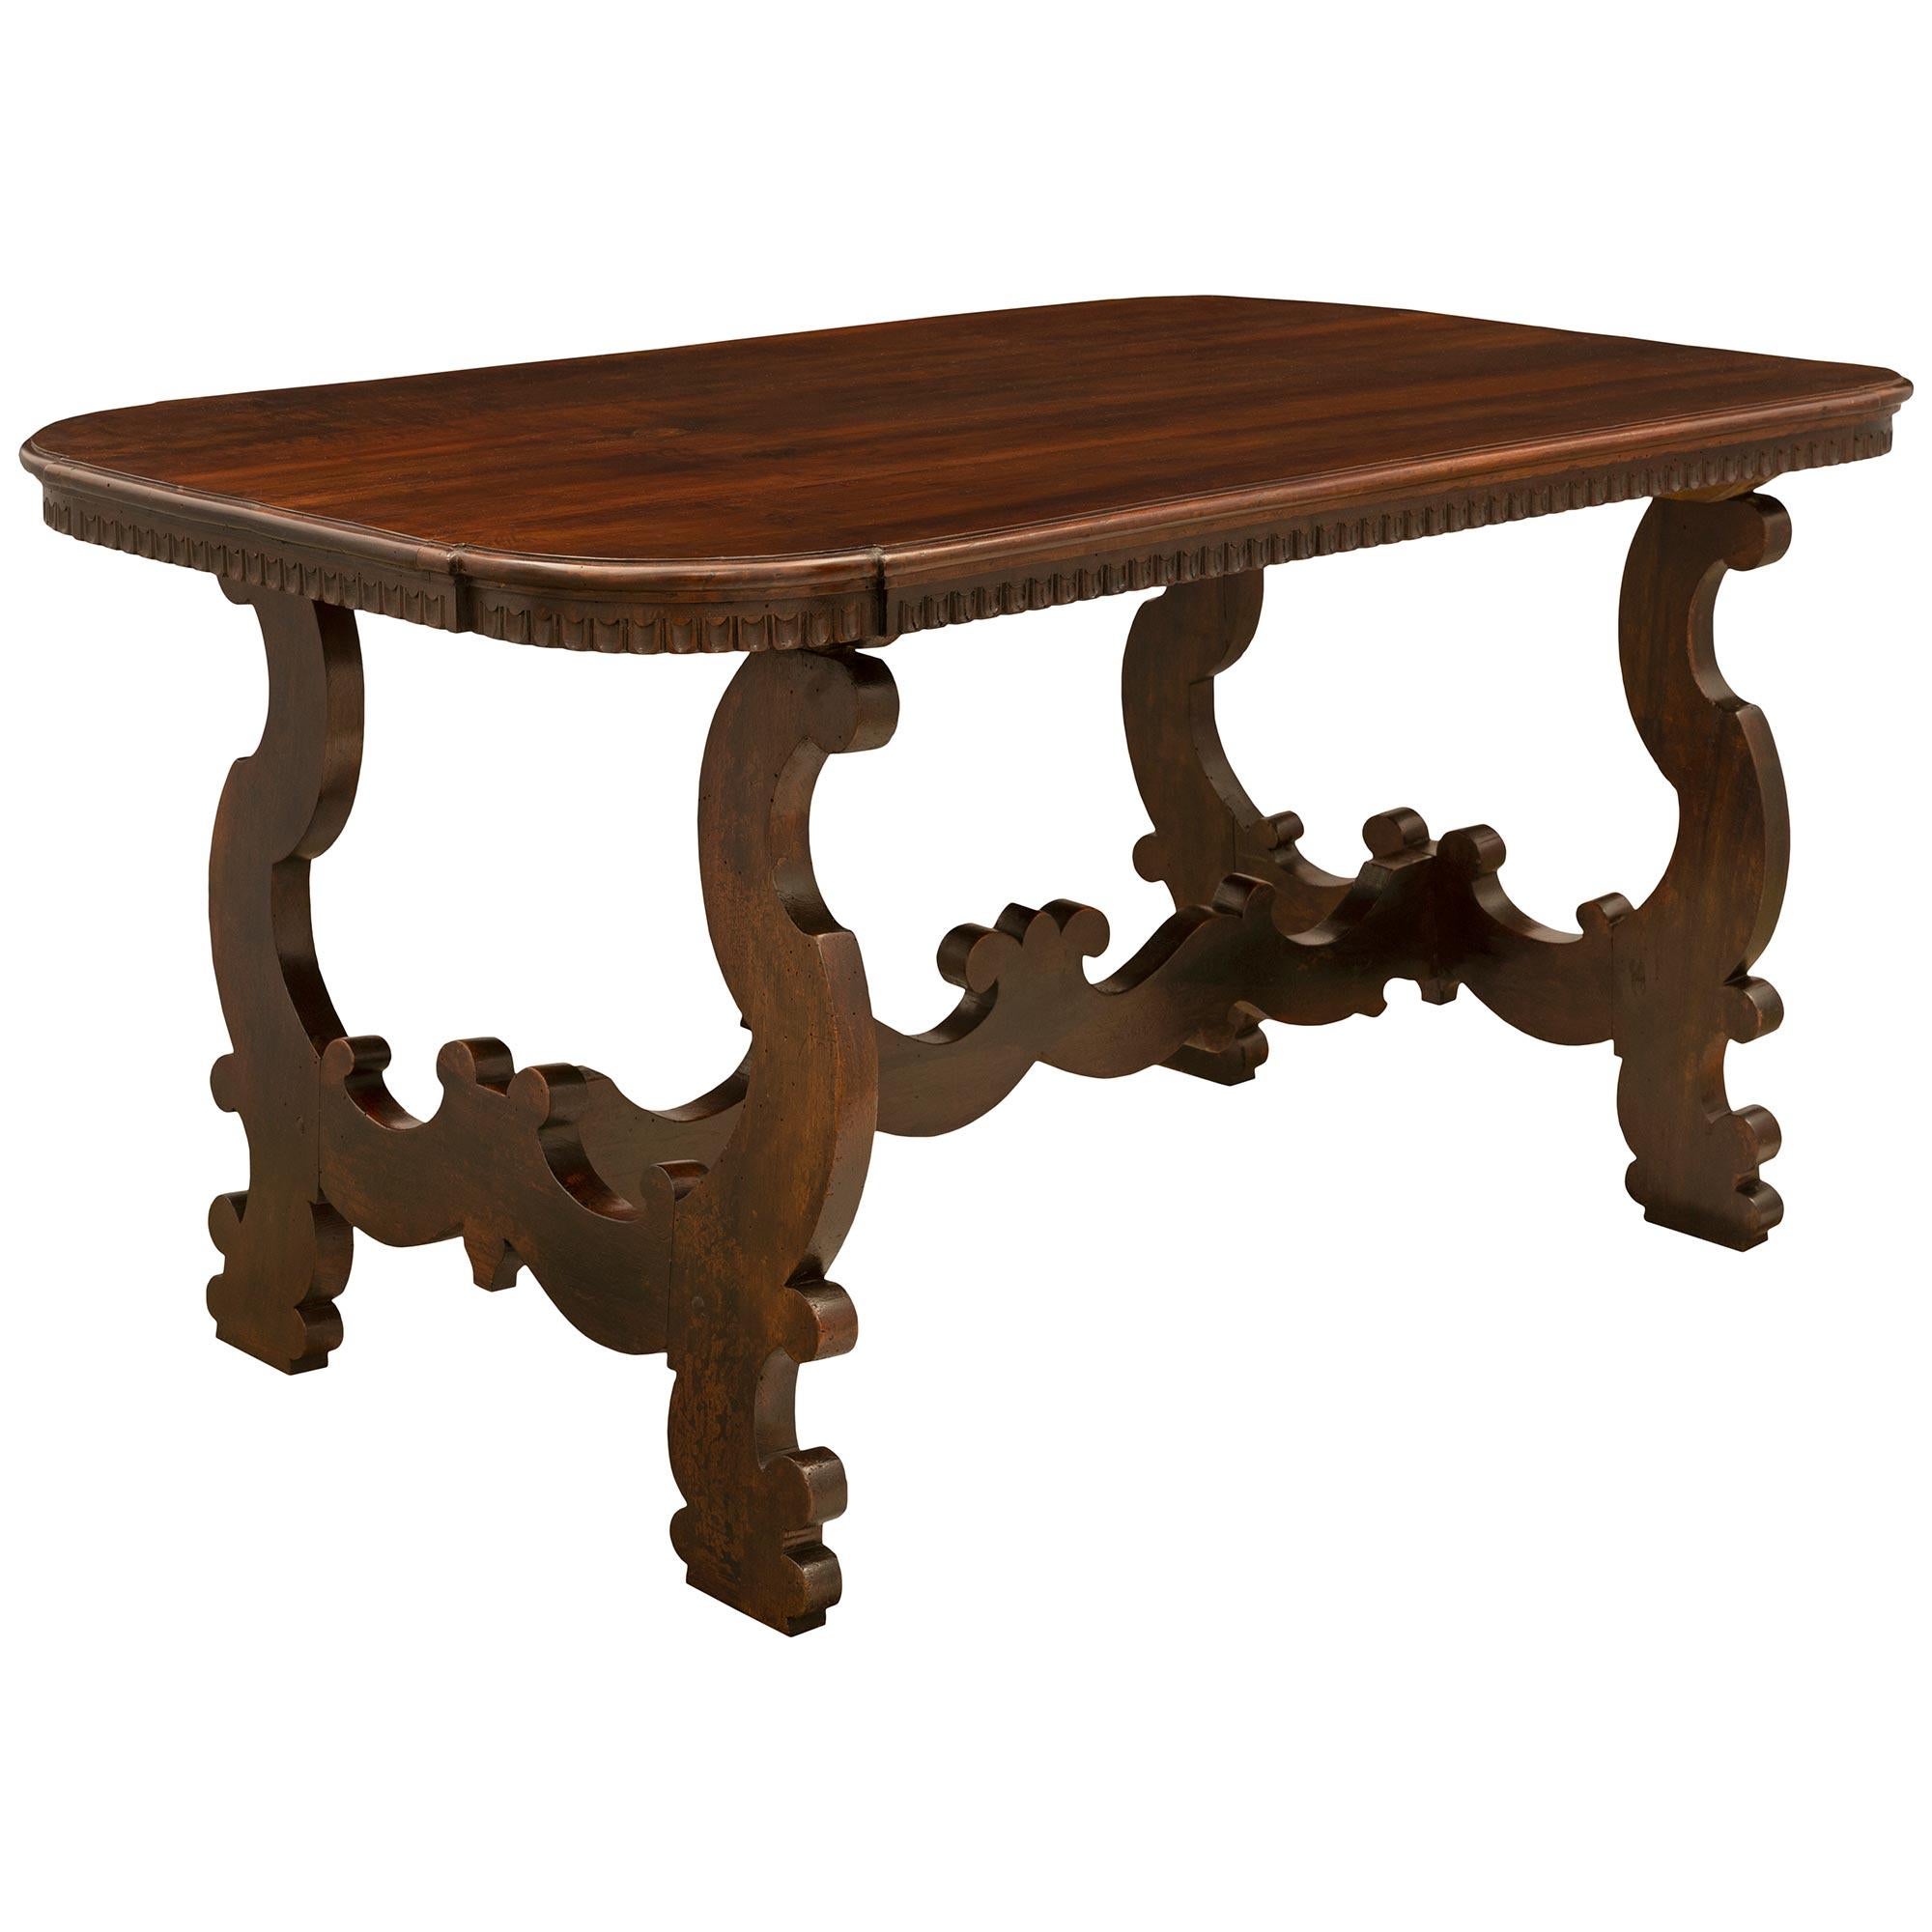 Italian 18th Century Tuscan St. Walnut Trestle Table In Good Condition For Sale In West Palm Beach, FL